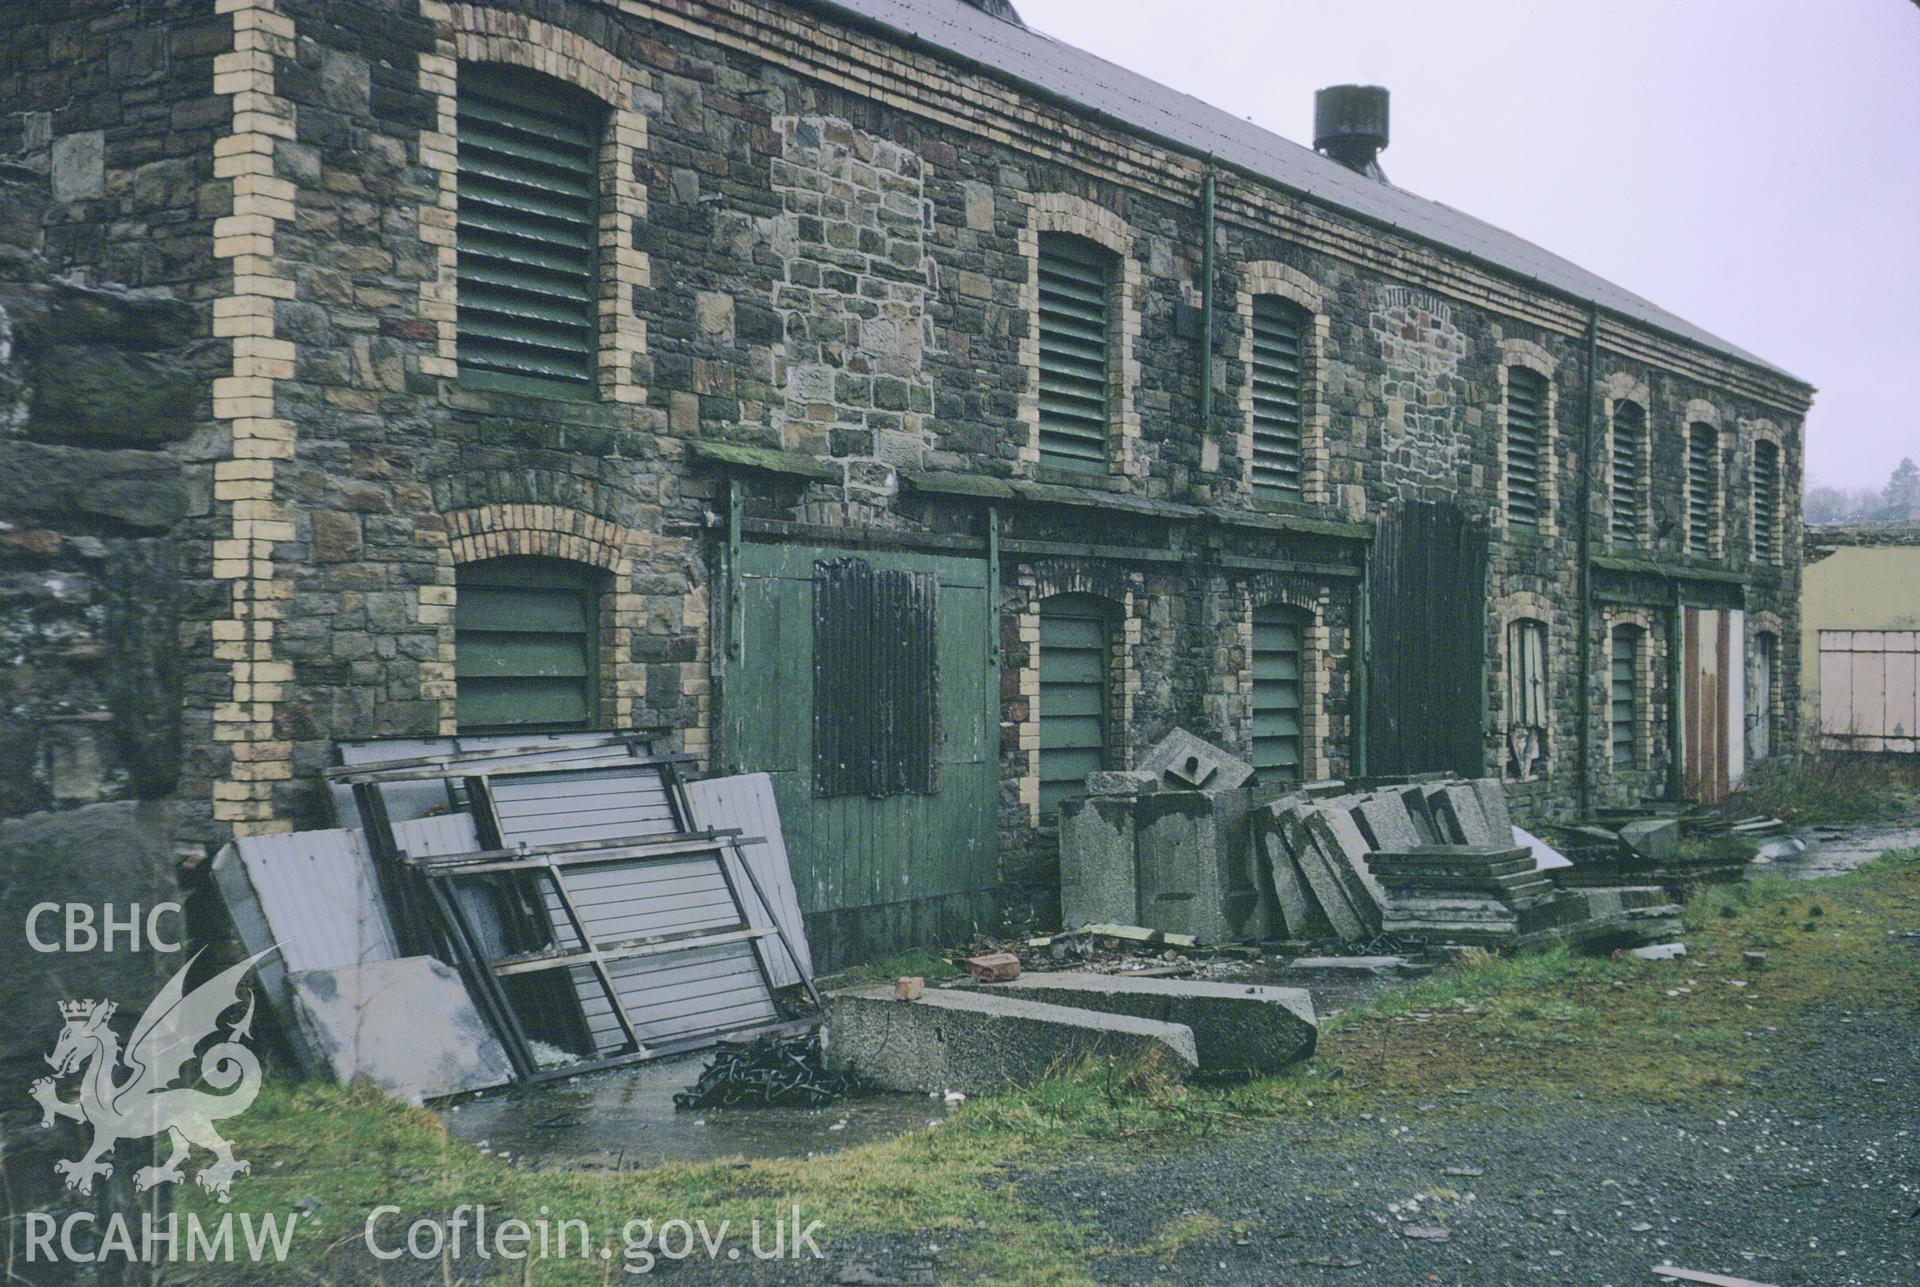 35mm colour slide showing Llanelli Slaughter House, Carmarthenshire, by Dylan Roberts.